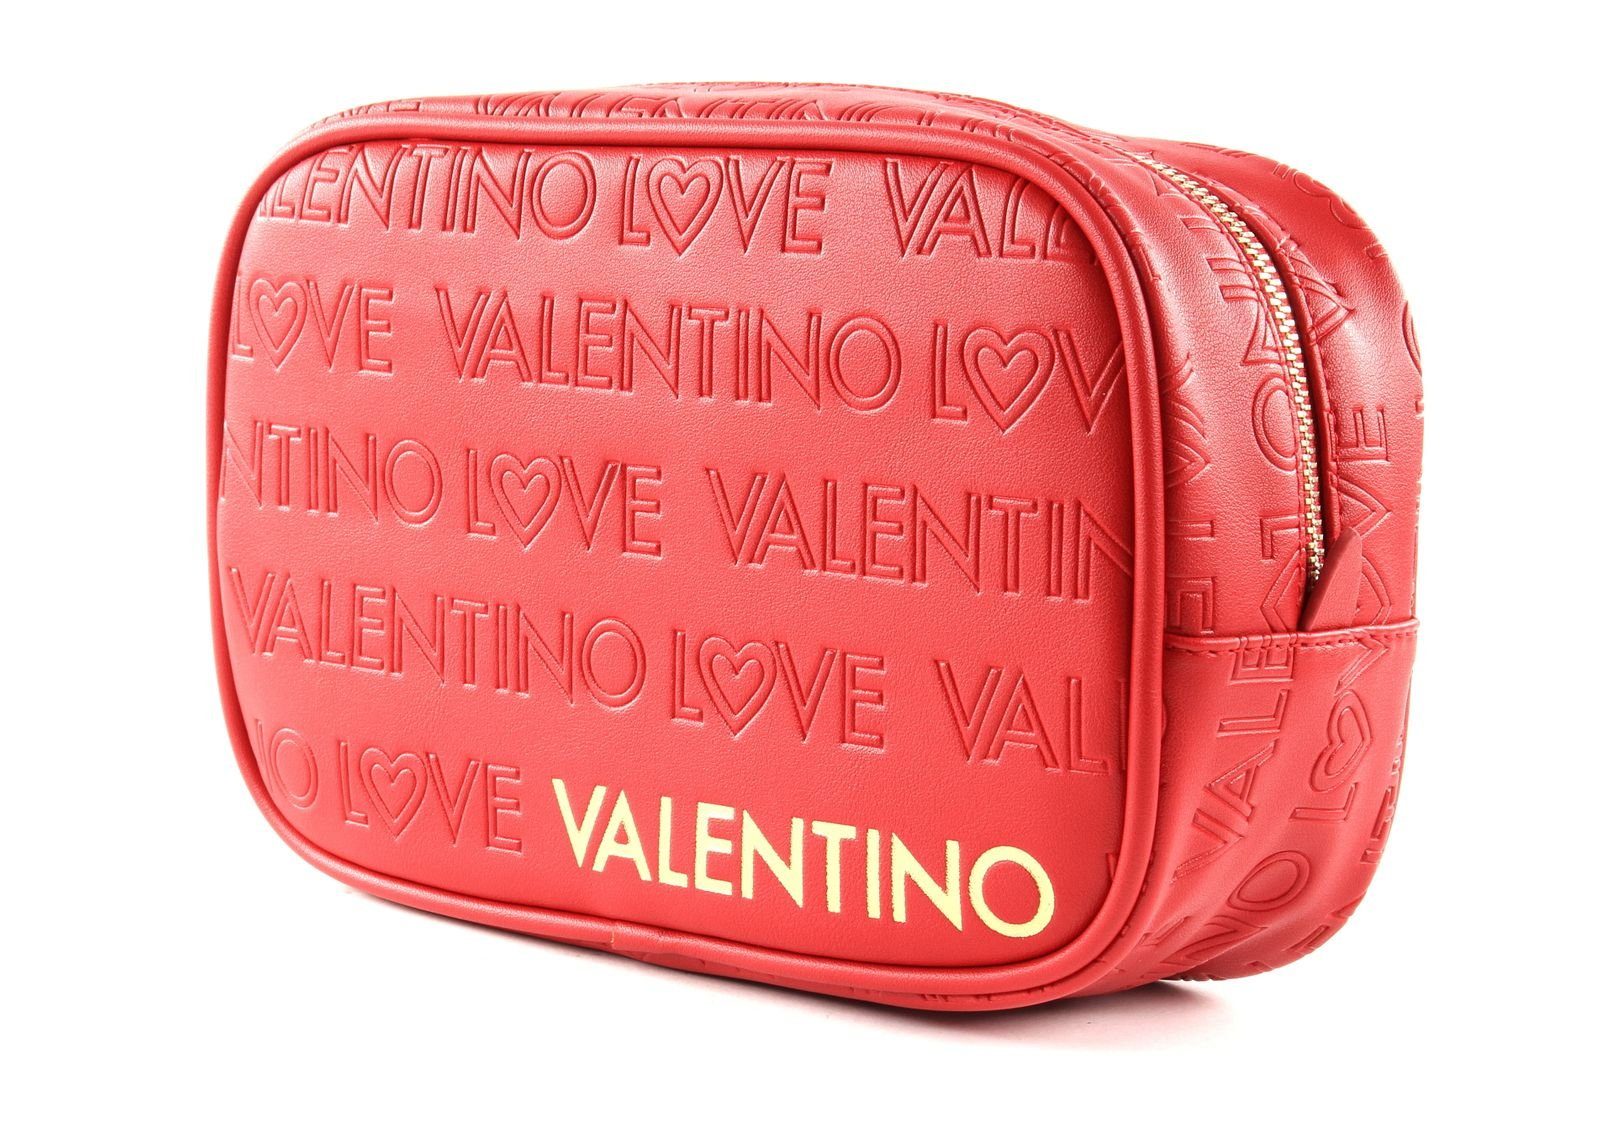 BAGS Rosso VALENTINO Kulturbeutel Lovely